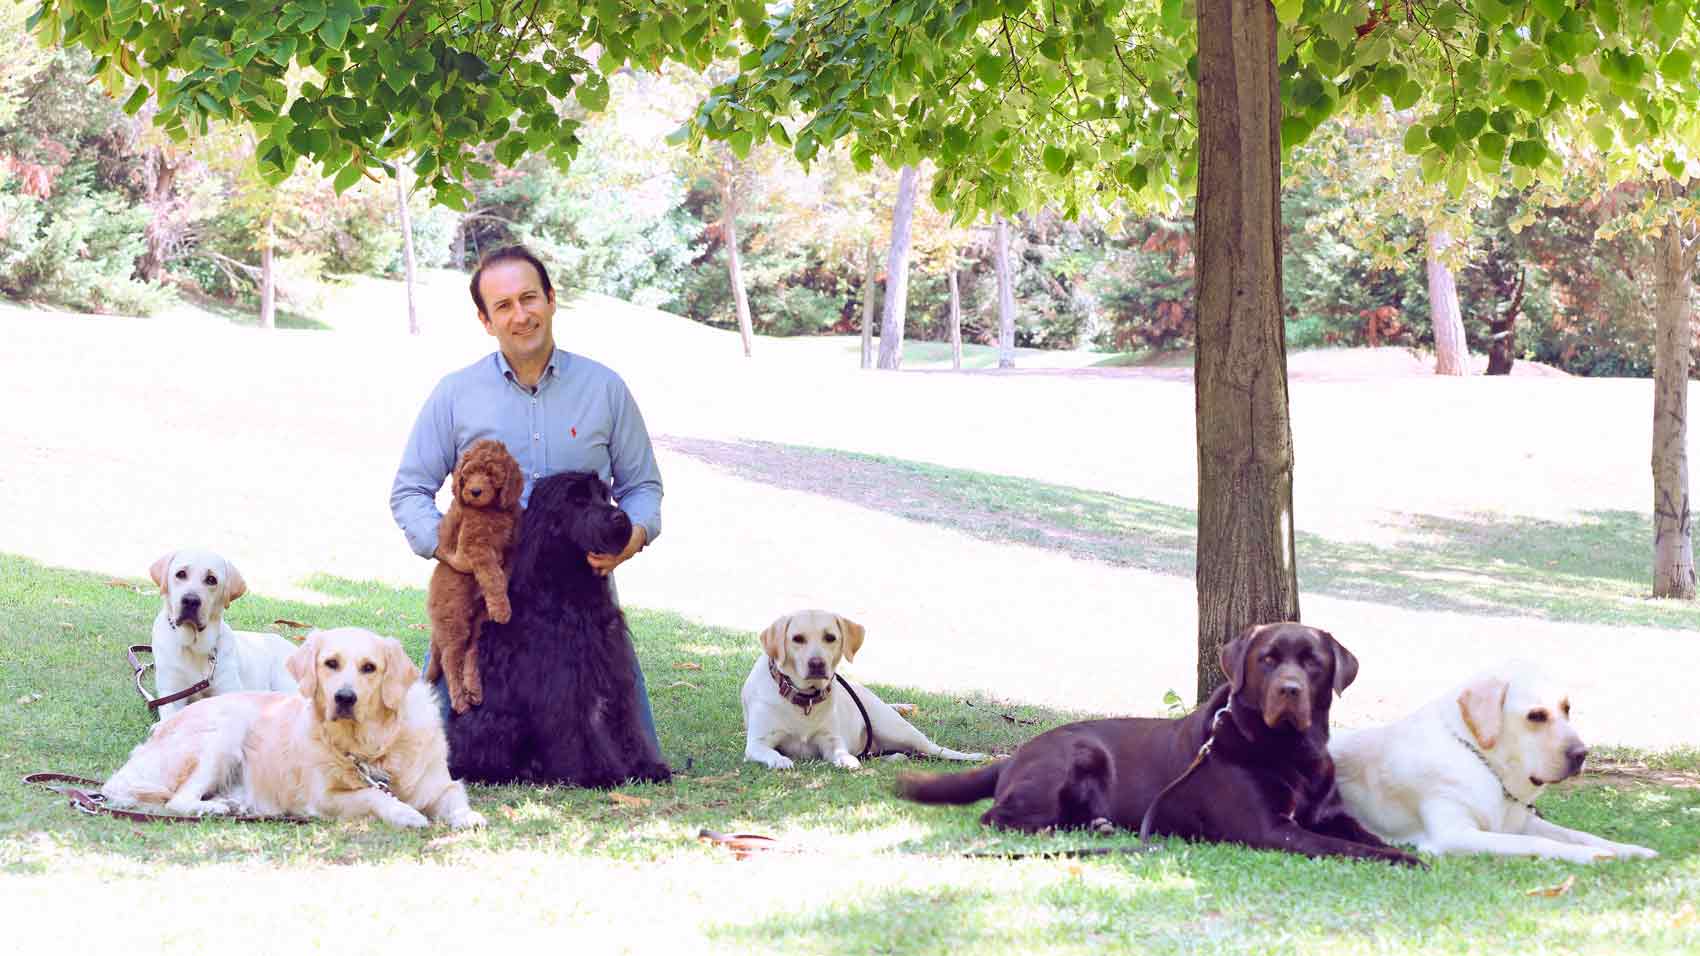 Man surrounded by dogs in the park